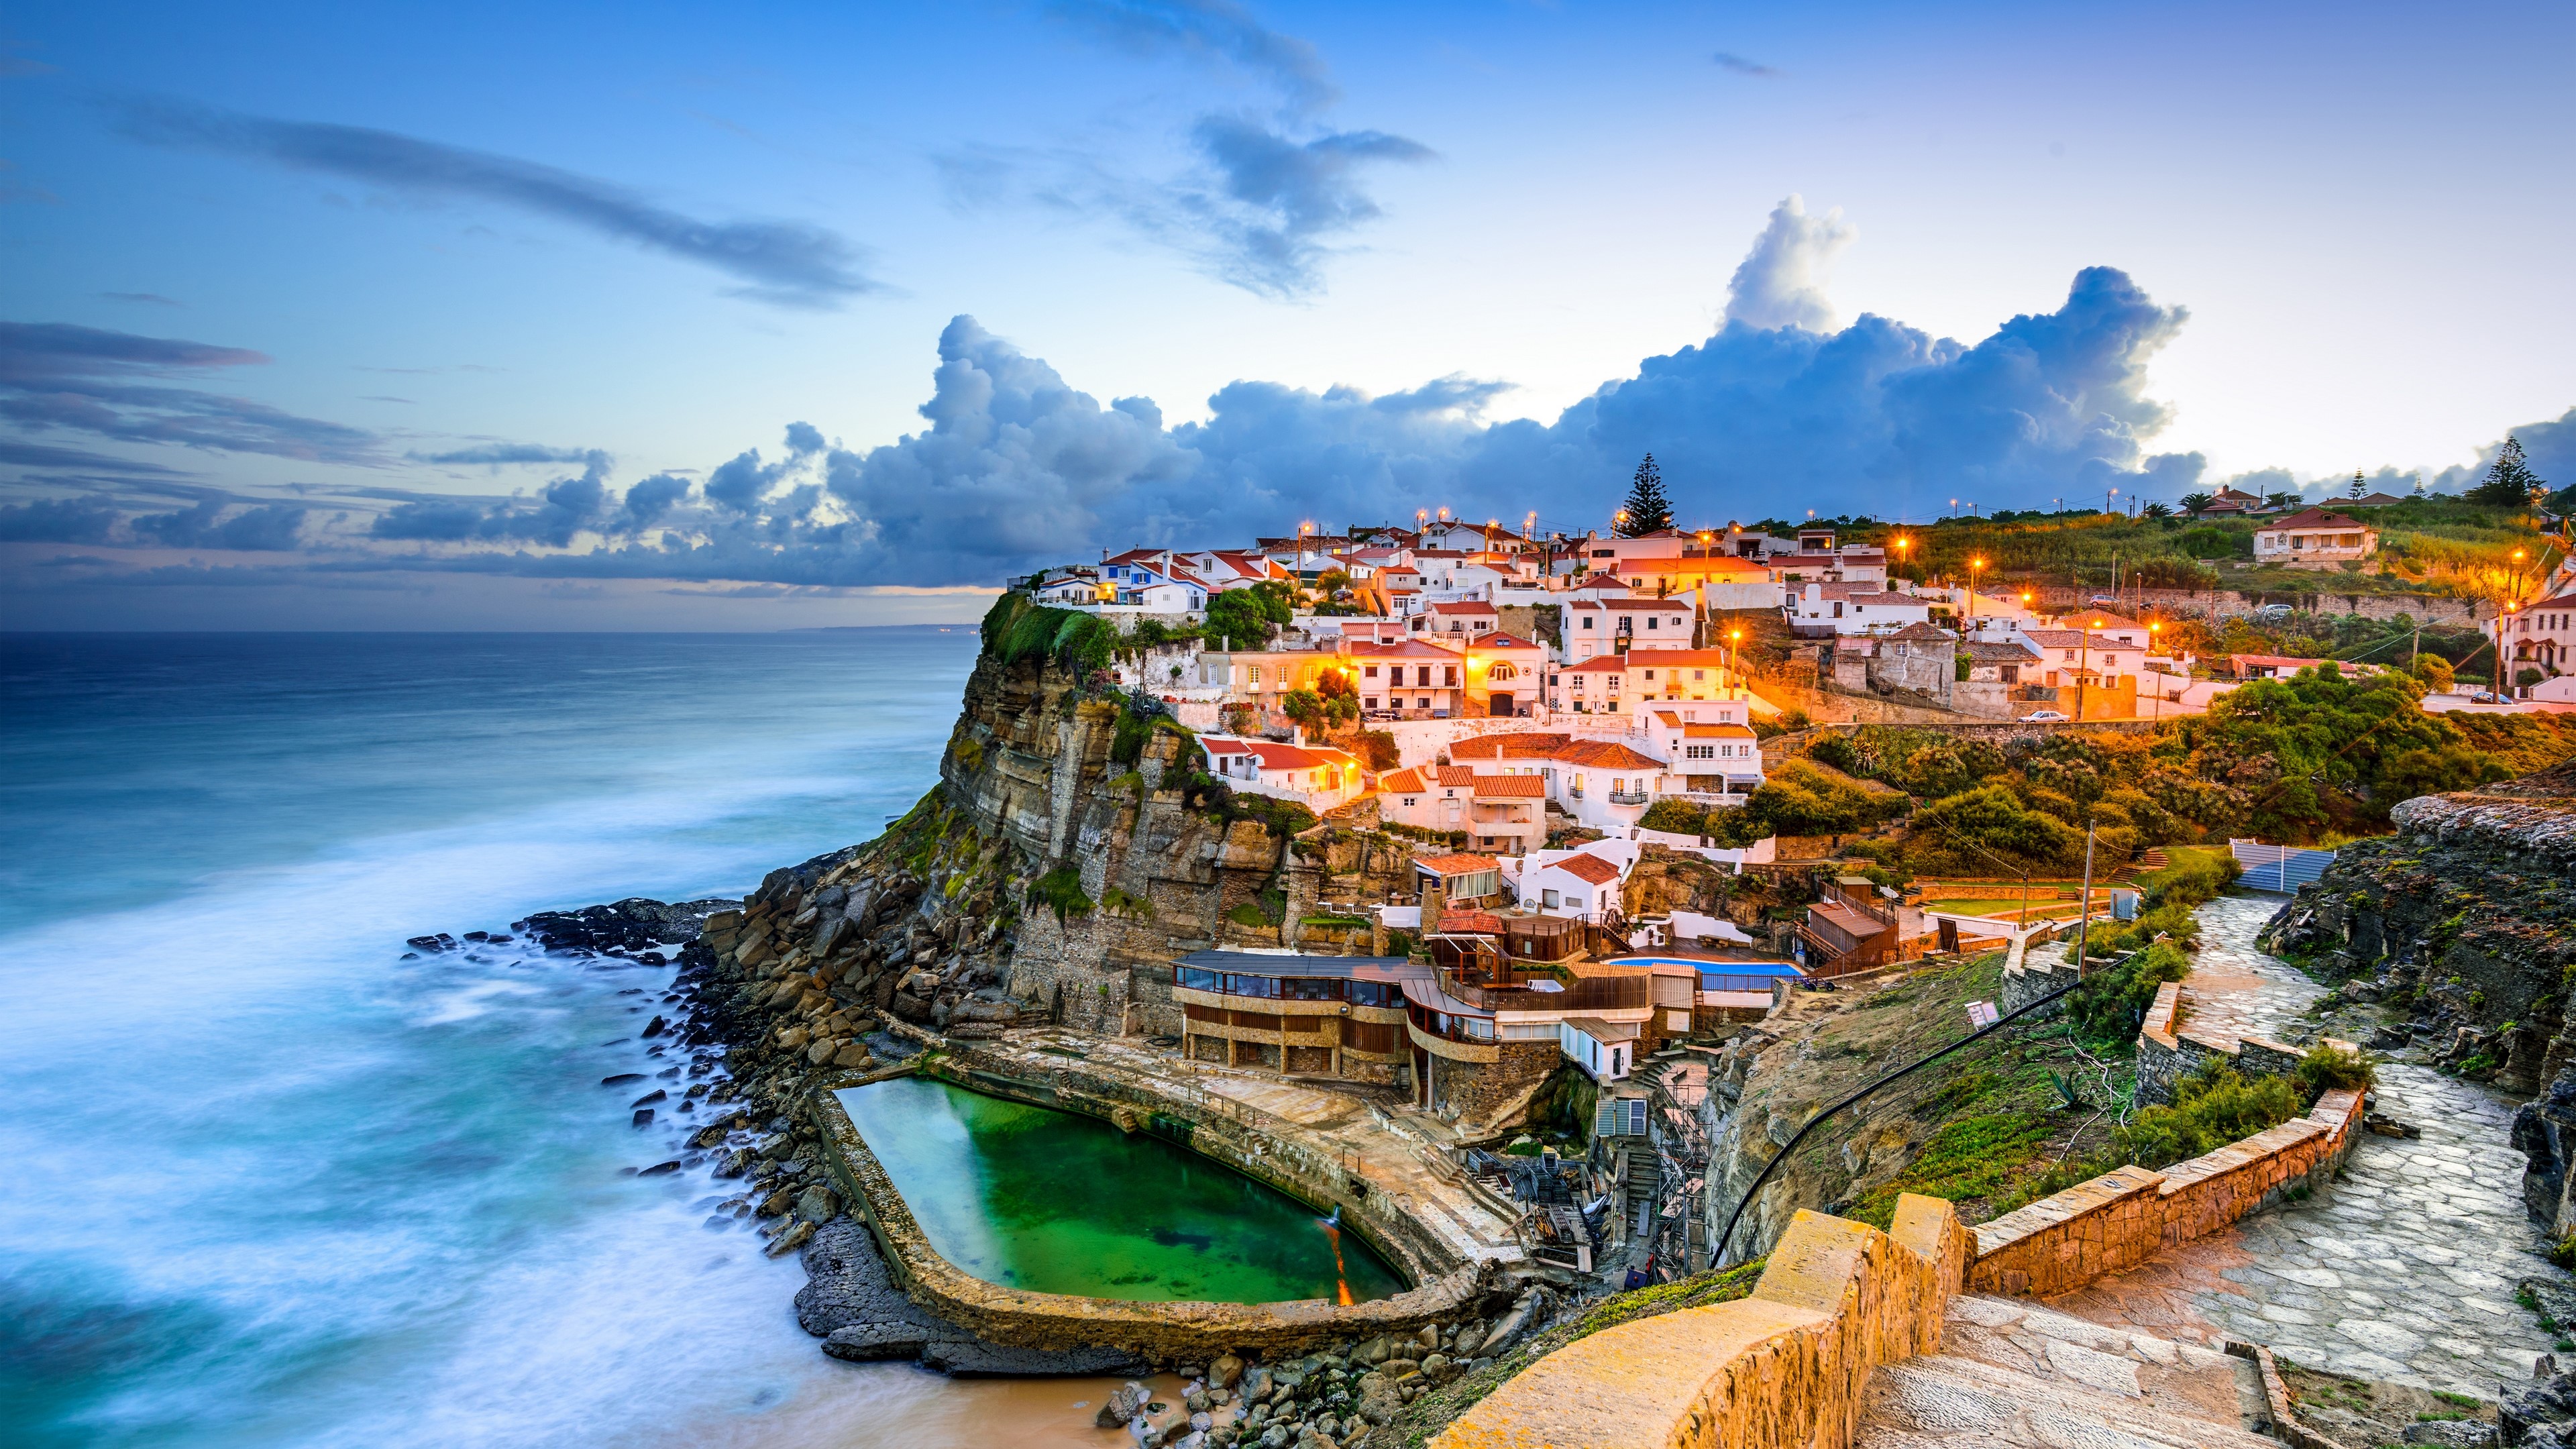 51+ Portugal Landscape Wallpapers: HD, 4K, 5K for PC and Mobile | Download  free images for iPhone, Android